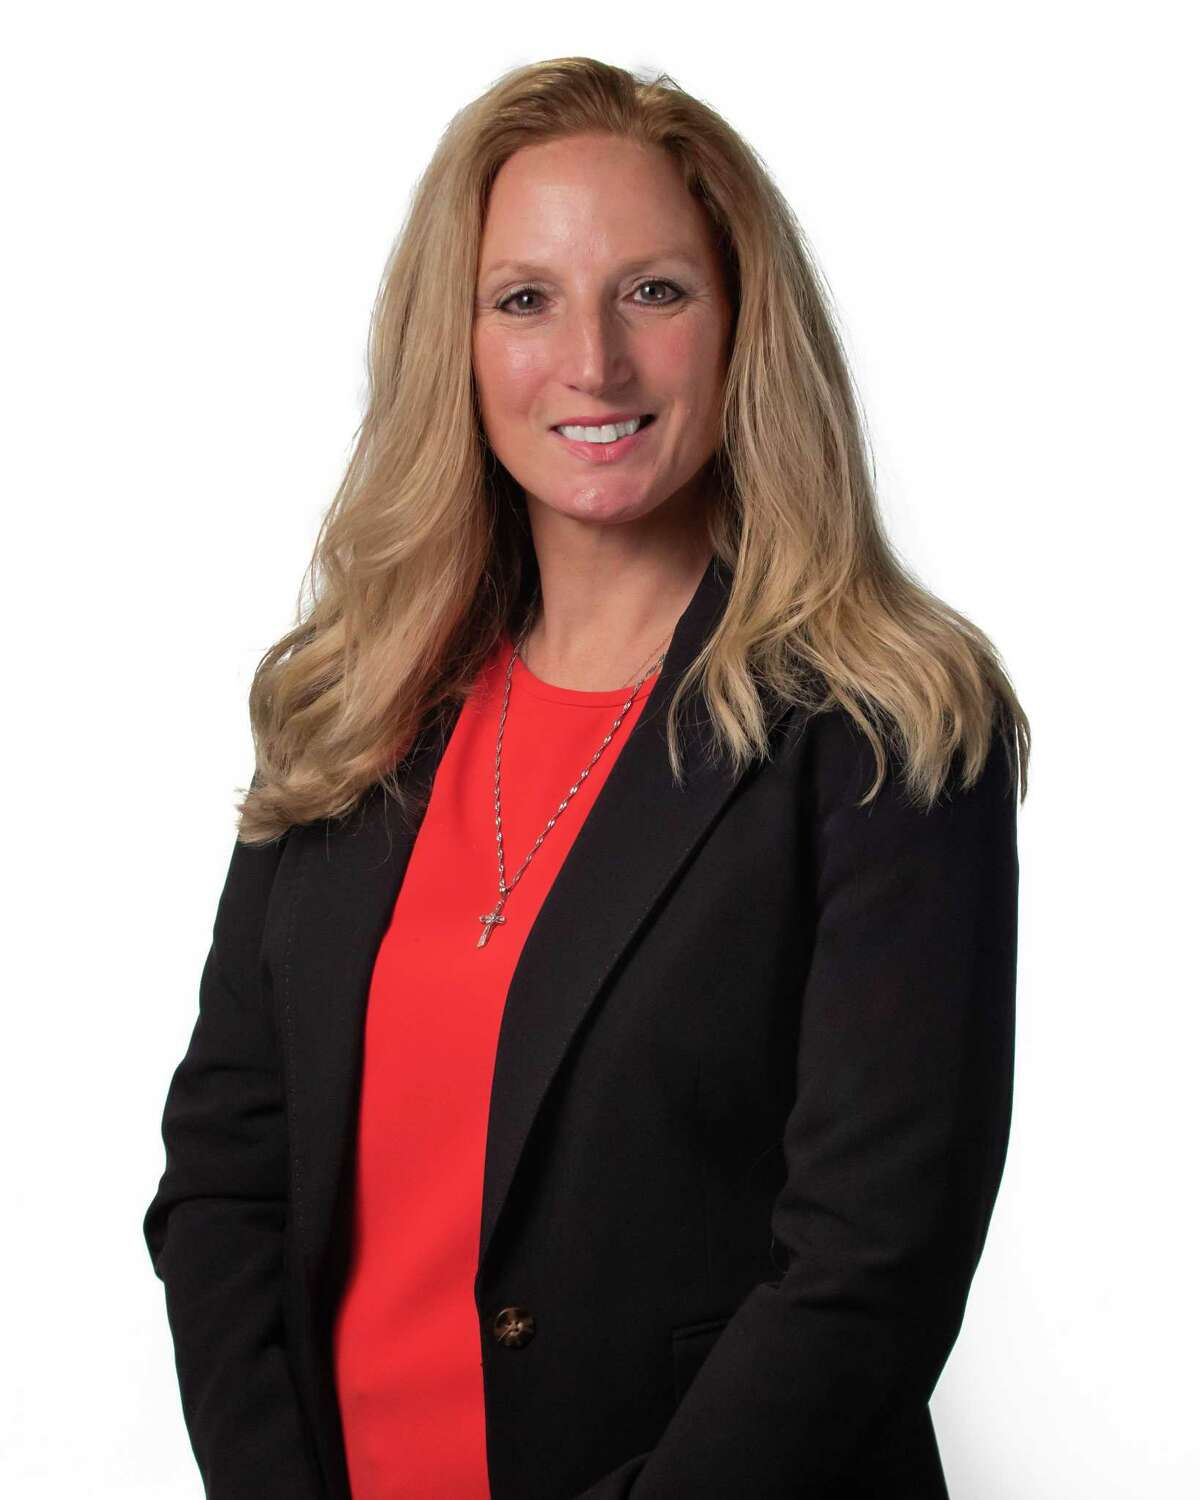 Union Savings Bank (USB) announces that Theresa LaRock, pictured, has joined the bank as a residential mortgage loan originator and Jordan Sanford has been promoted to residential mortgage loan originator.